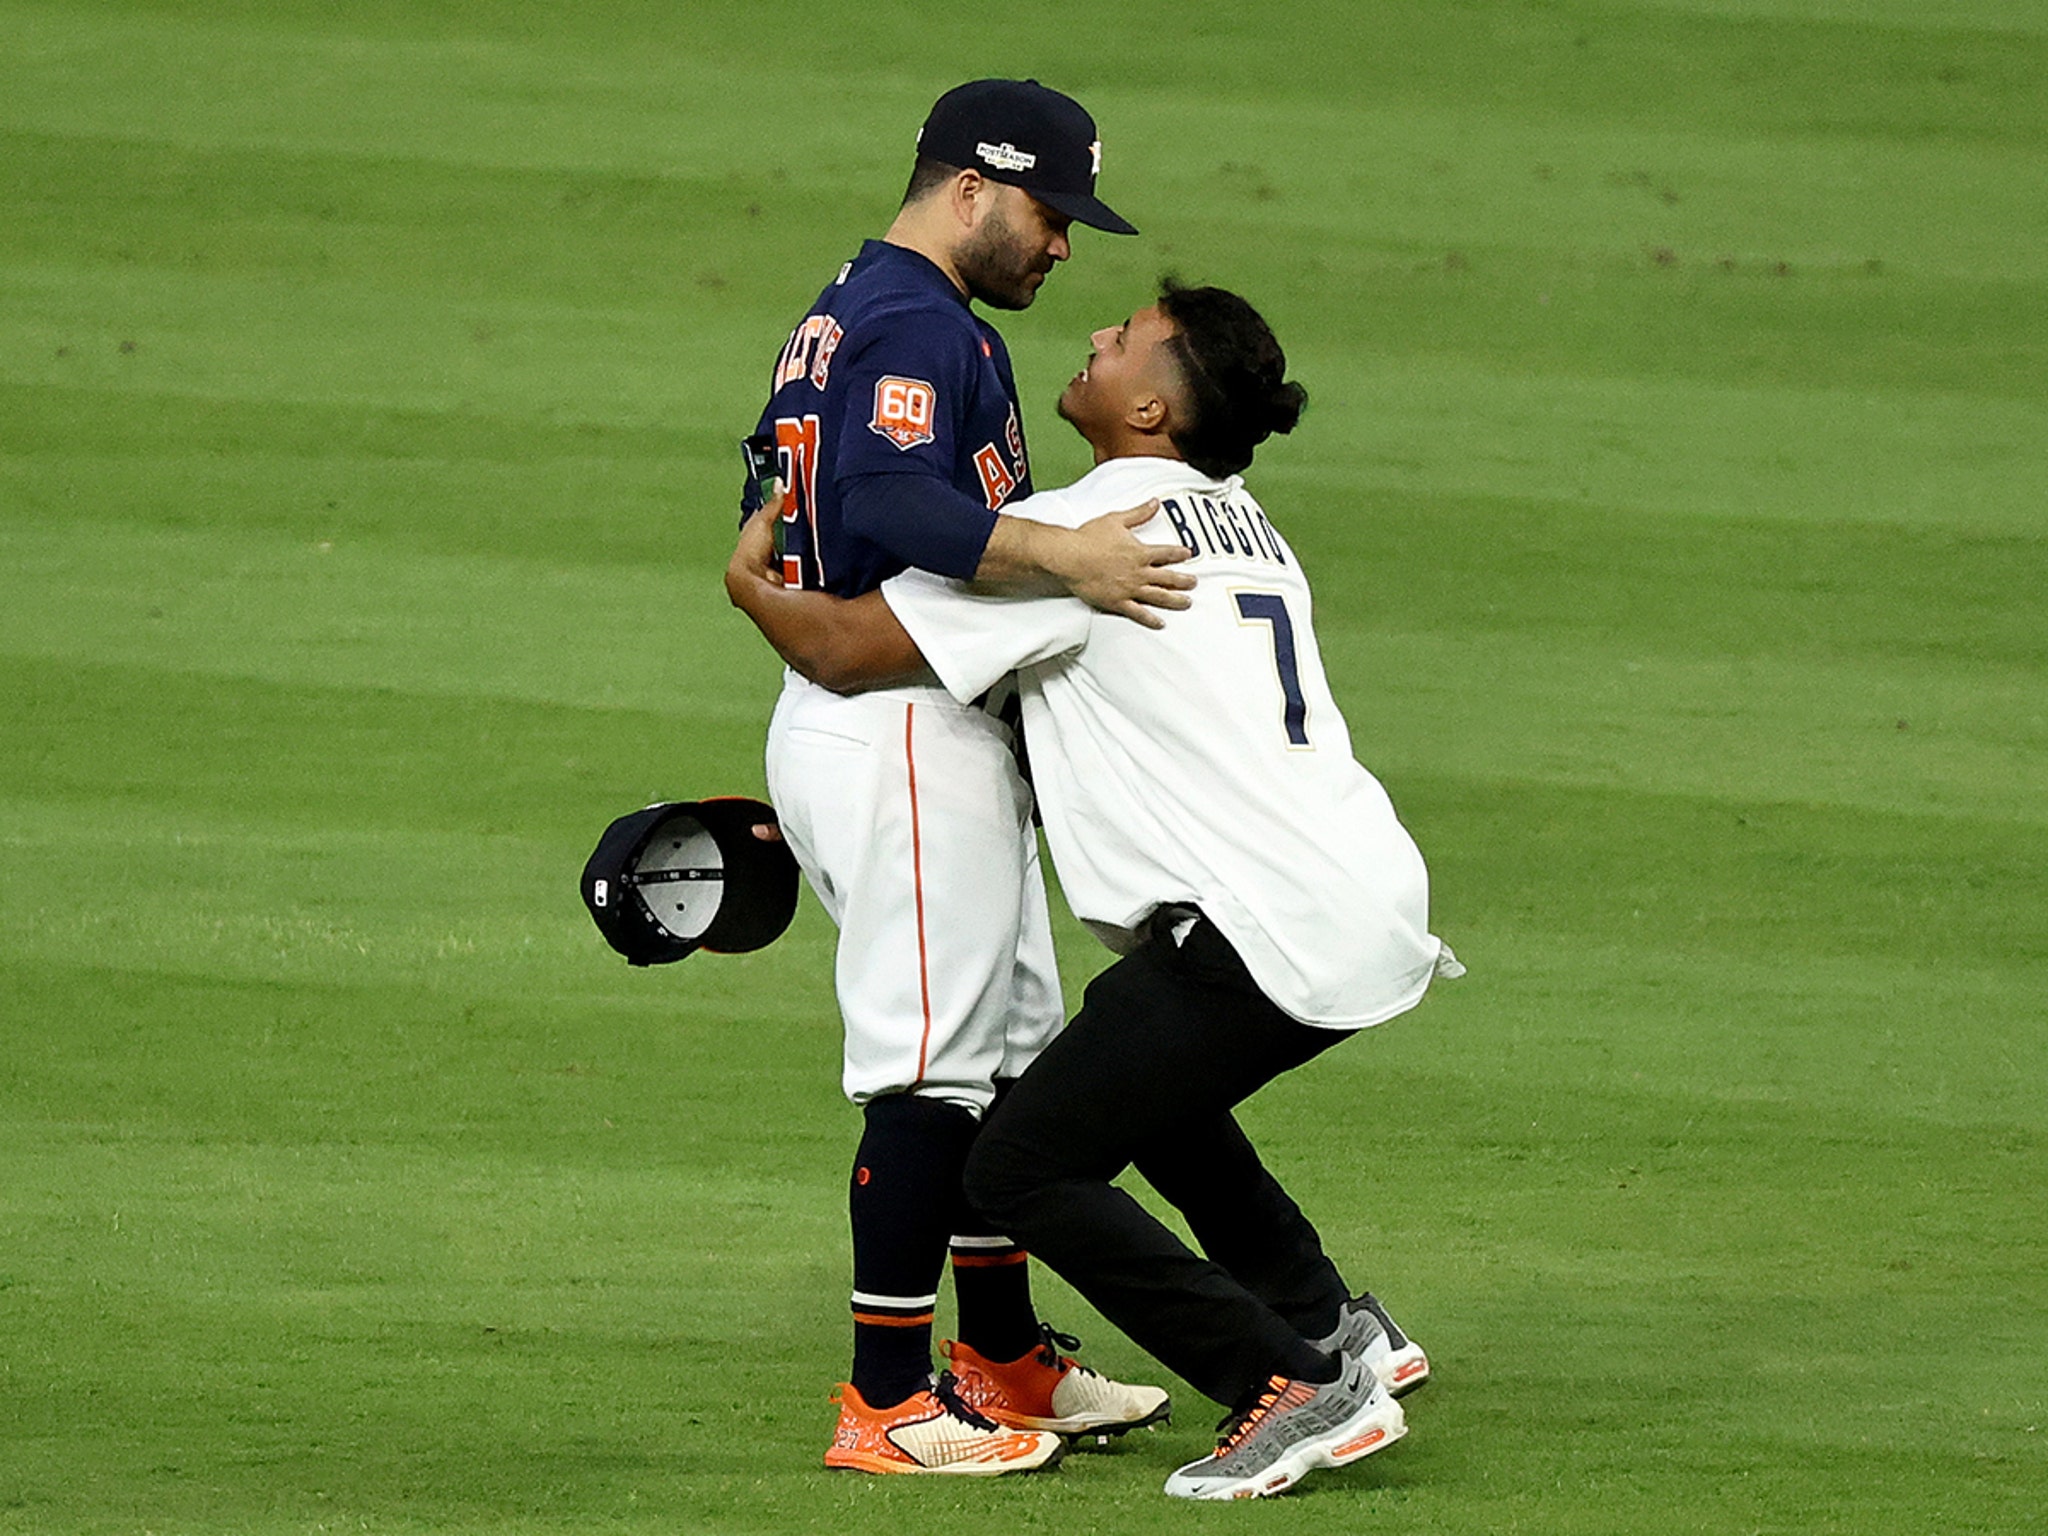 Wish granted: Astros fan who ran out on field to get selfie with Jose  Altuve gets long-awaited pic with baseman at Academy Sports